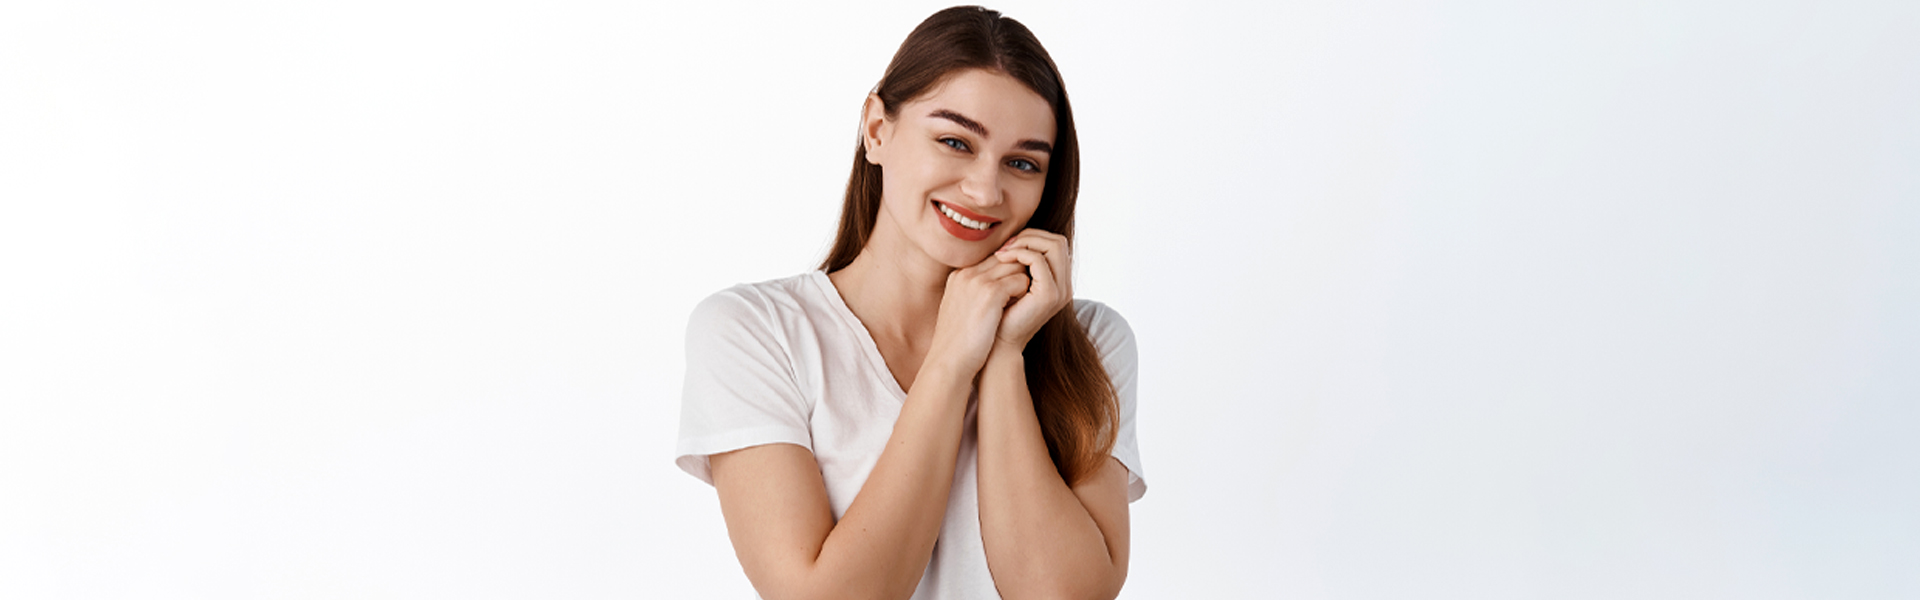 How to Find Teeth Whitening Dentist in Salmon Arm